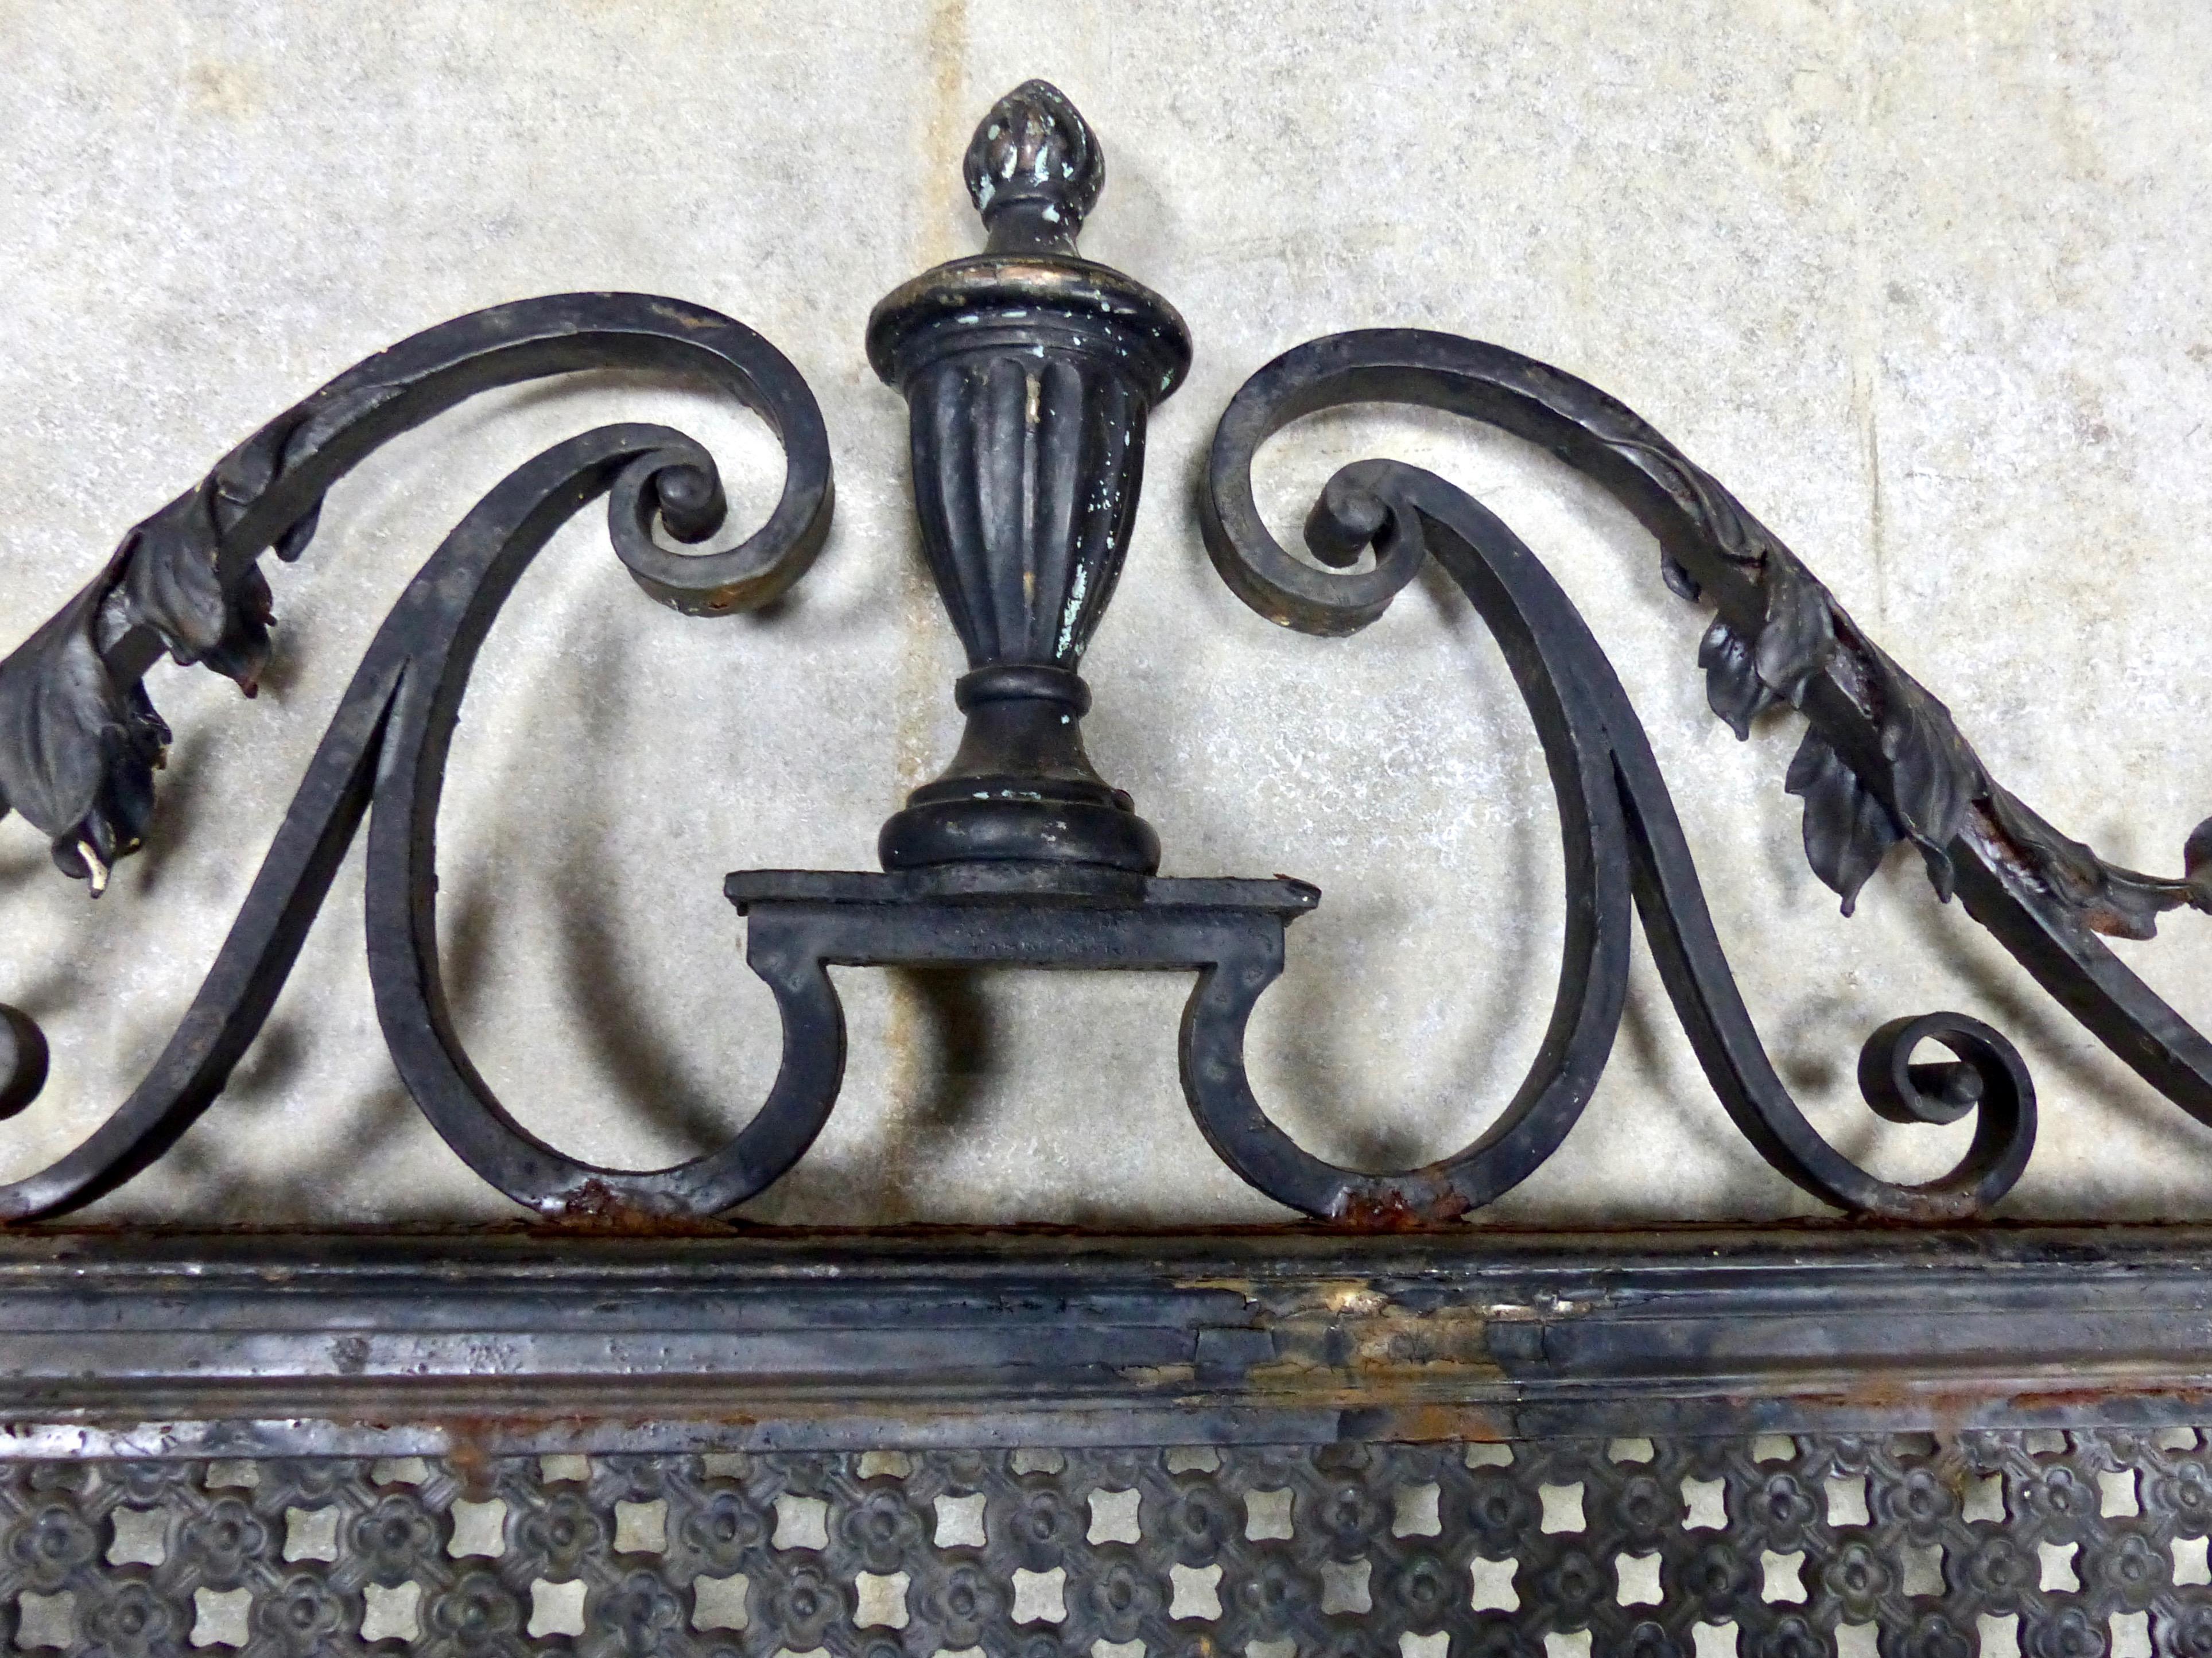 The original security system: an ornate cast iron grate over a window. 
Wall art.
 Wonderful design and details in a formerly utilitarian object. Found in New York City. Dimensions: 70 H” x 47 W” x 3 D”.